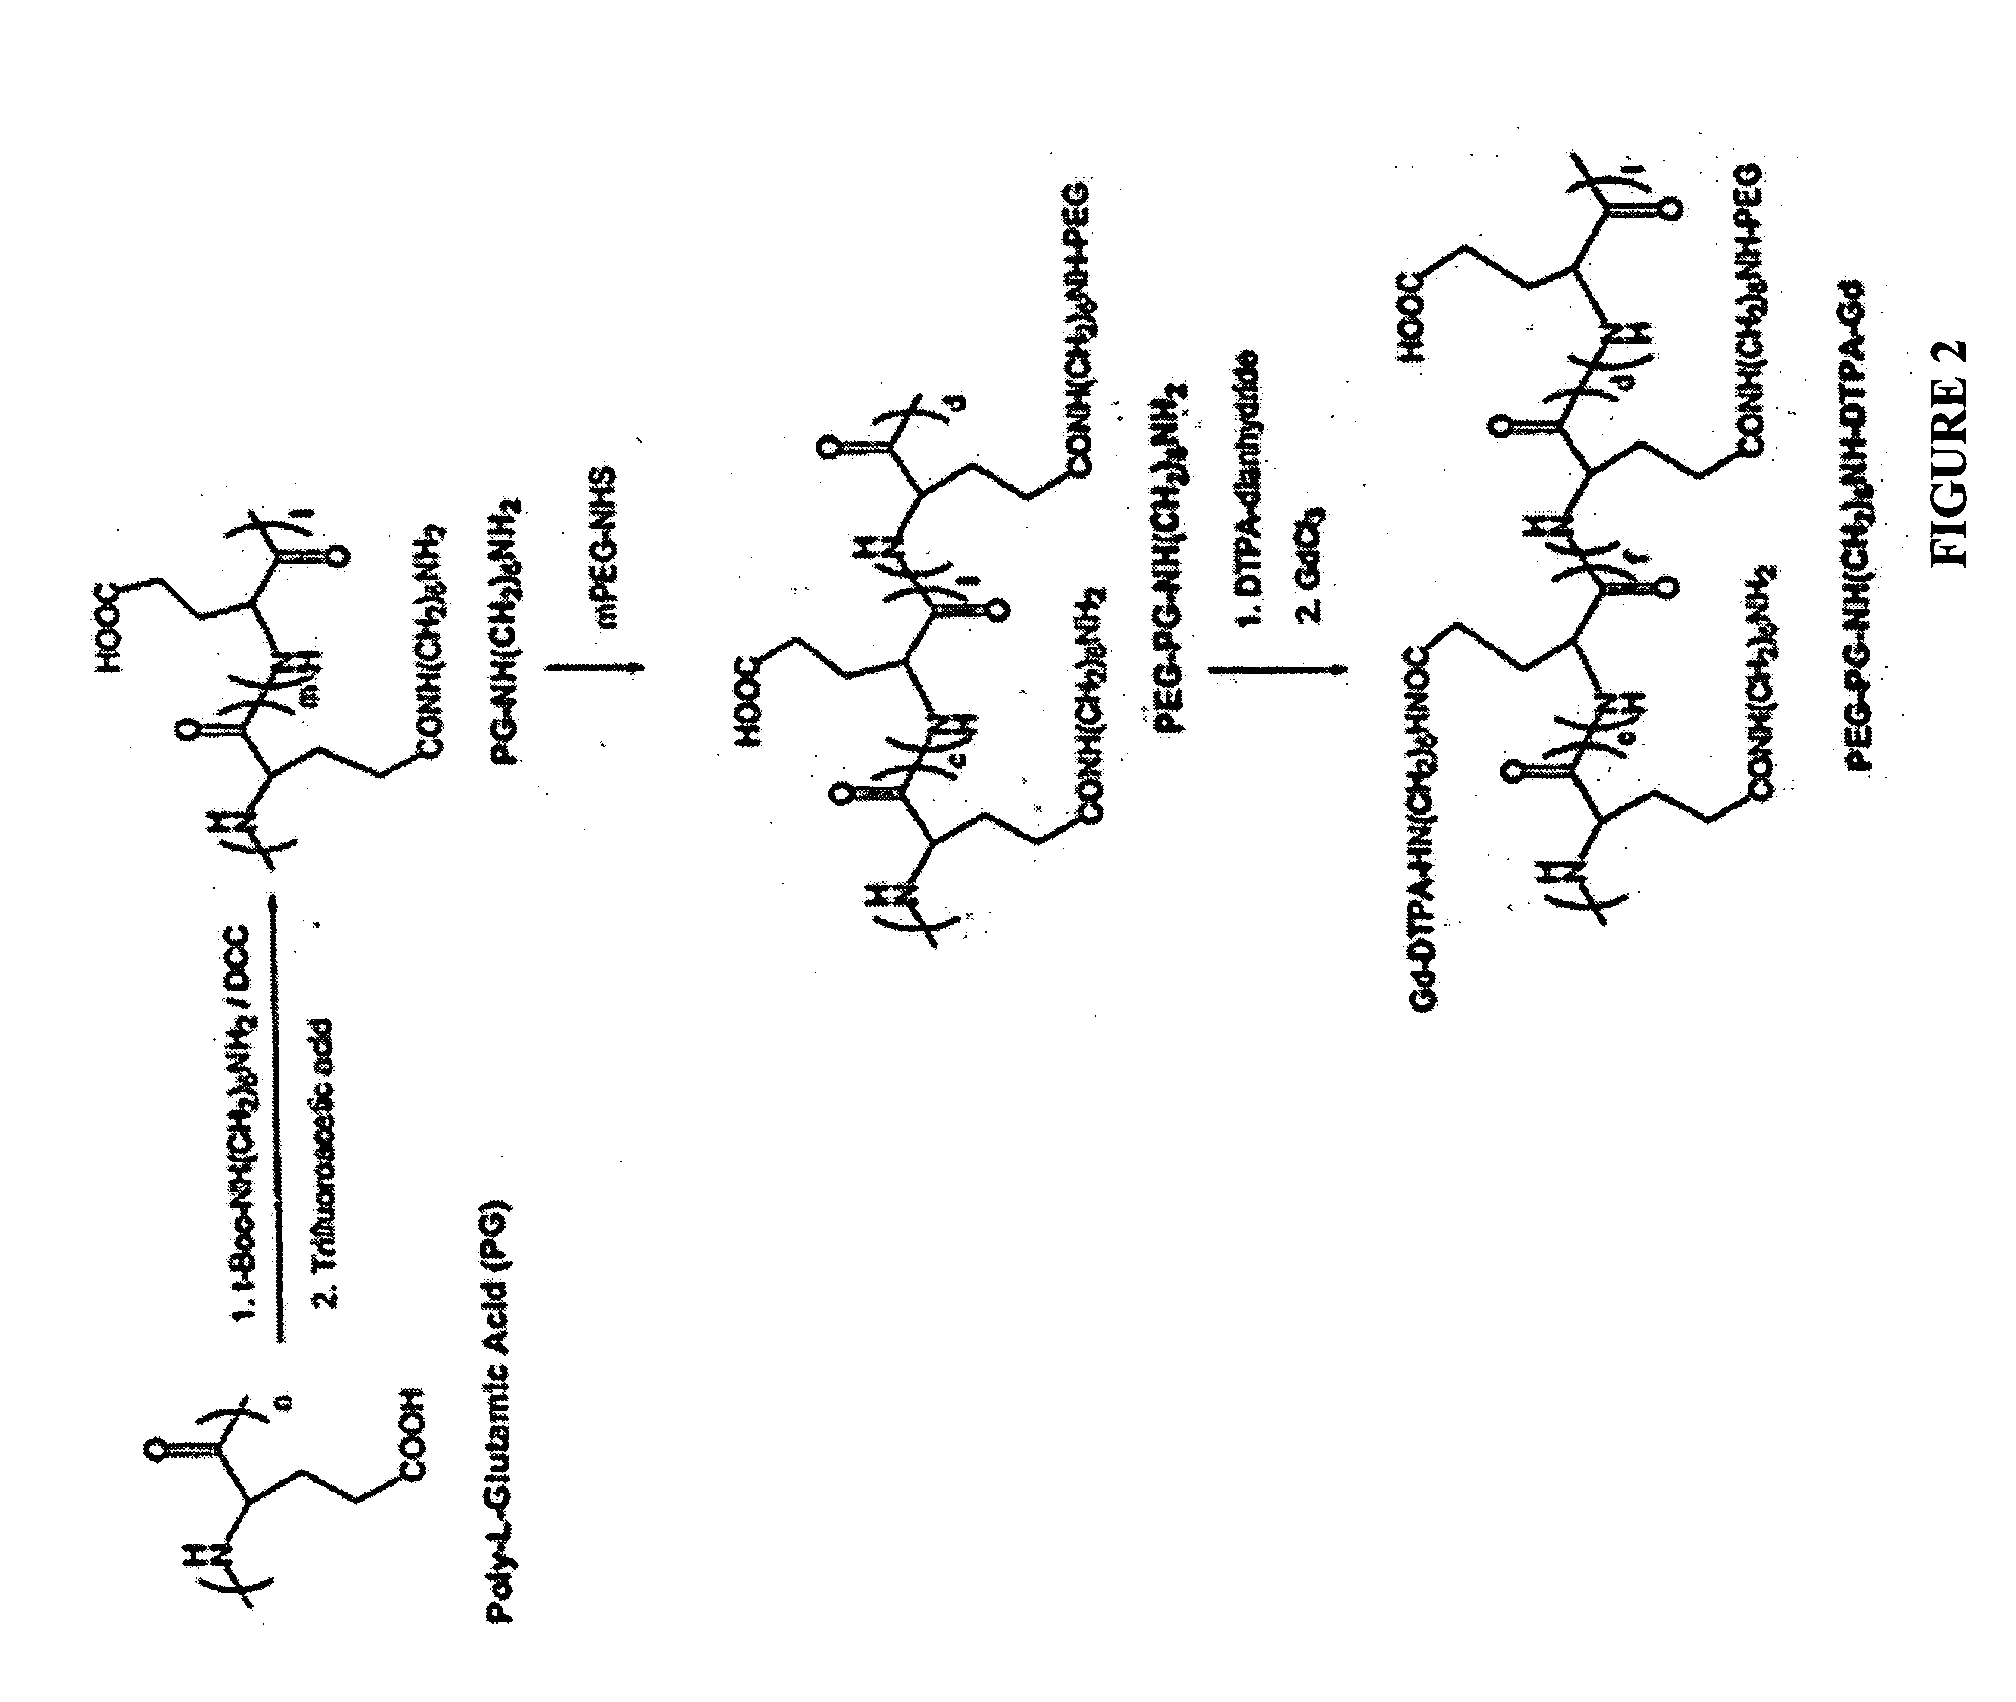 Poly (L-glutamic acid) paramagnetic material complex and use as a biodegradable MRI contrast agent